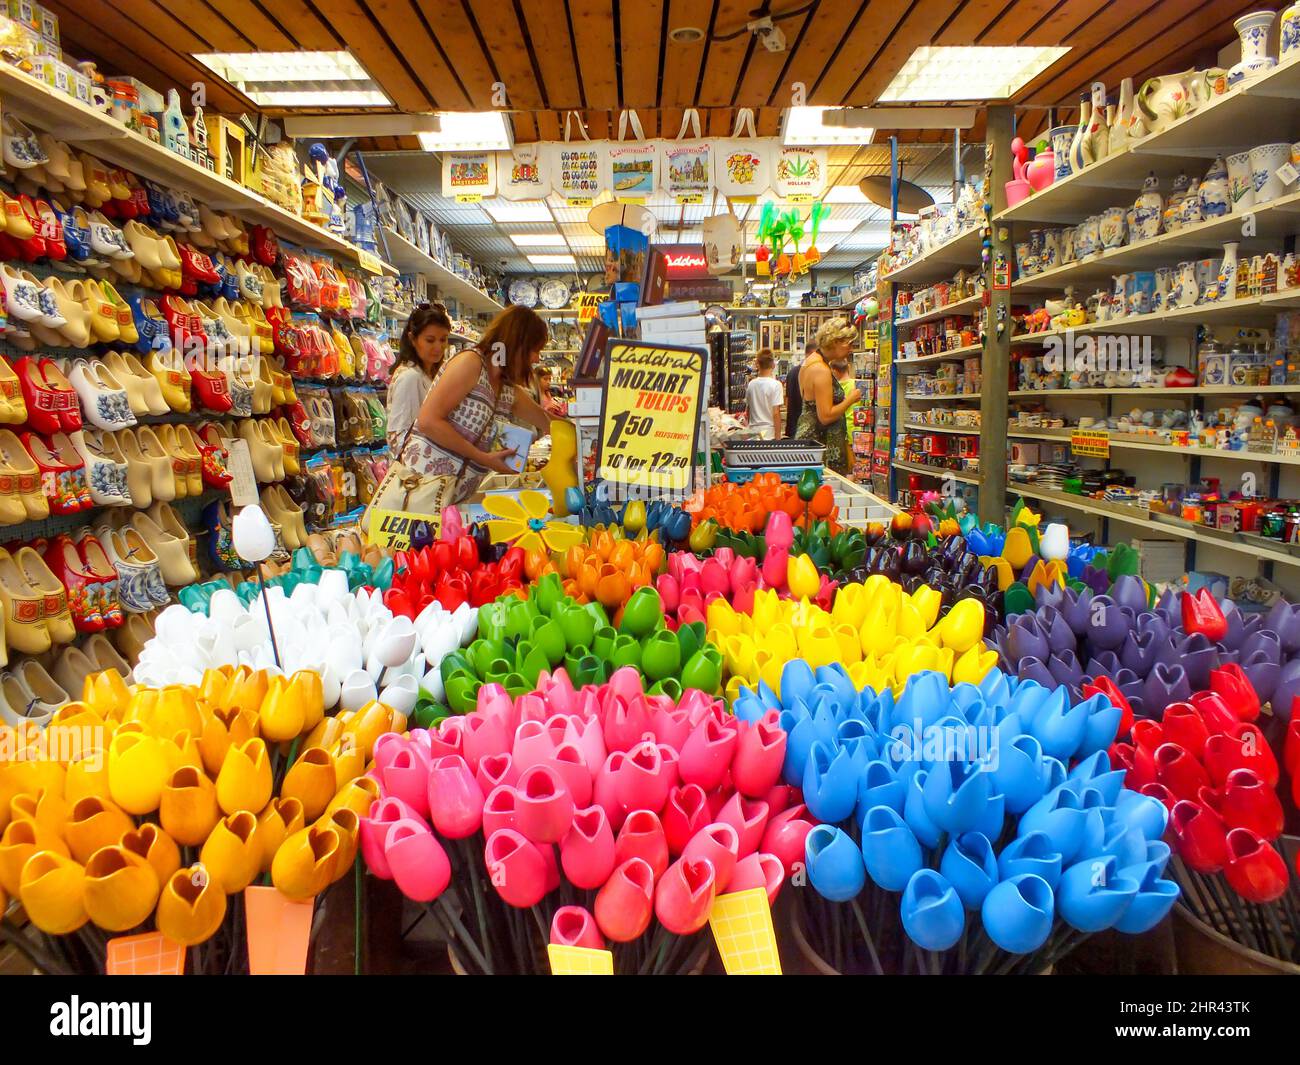 Amsterdam - May 1, 2014, Souvenir shop in Amsterdam, Holland, Netherlands, Colorful Tulips, Flower store, Mozart Tulips, people are shopping, Clogs Stock Photo